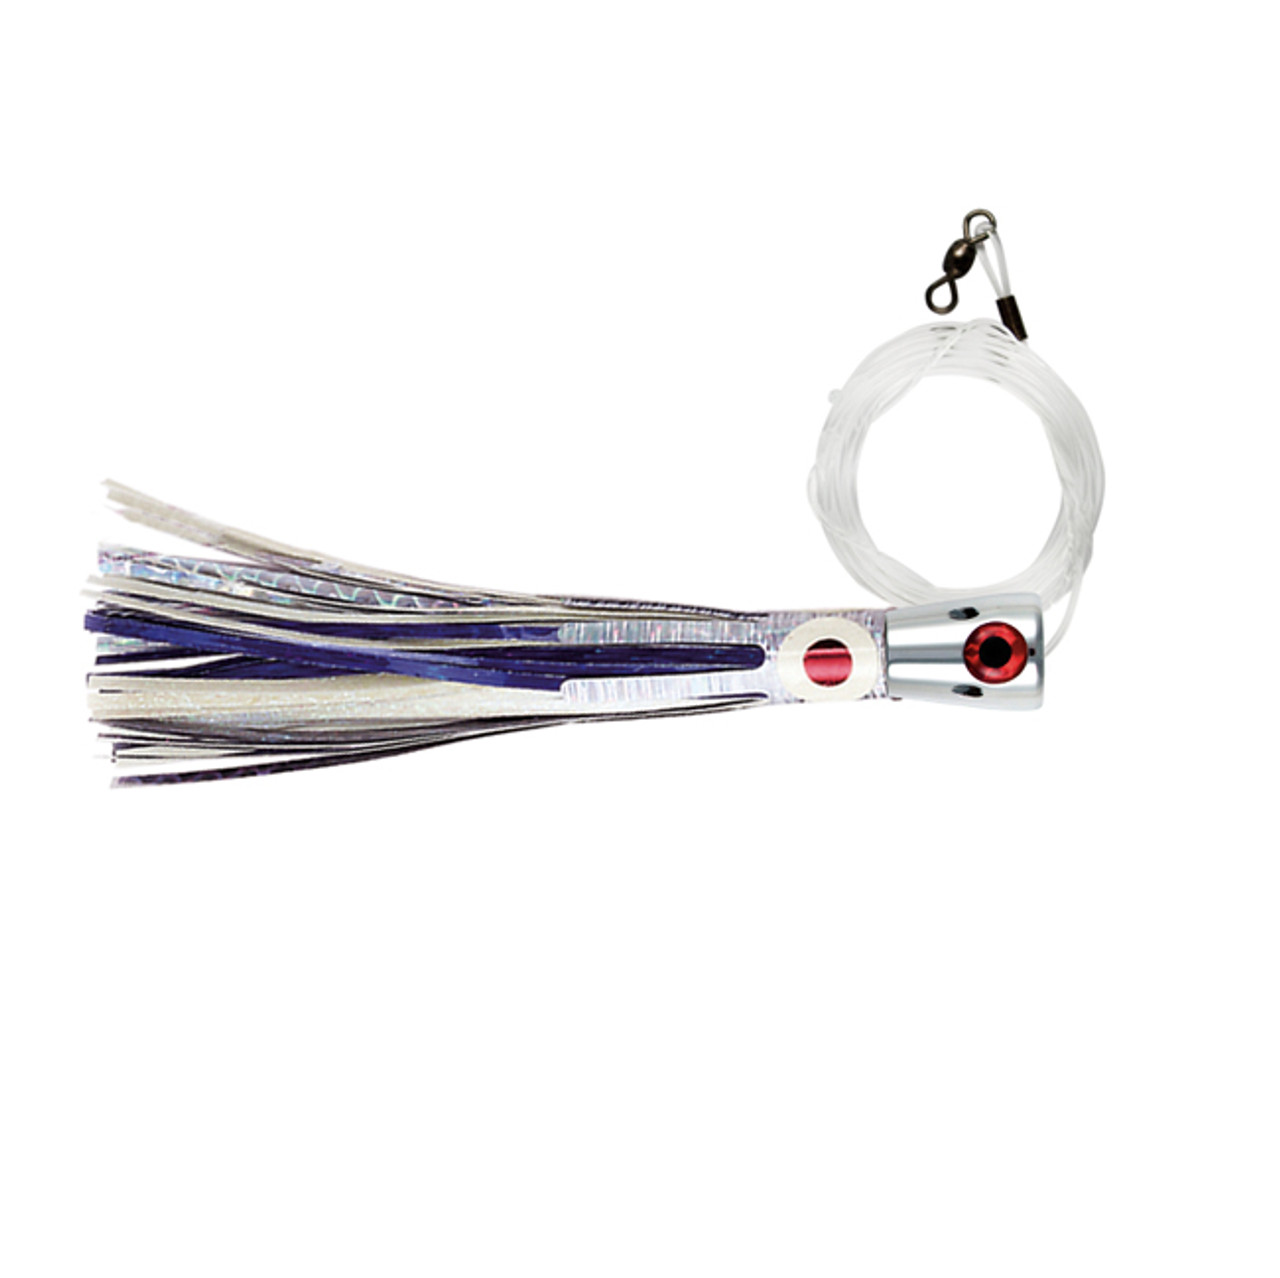 Billy Baits - Mini Turbo Slammer Lure - Rigged & Ready Cable - FISH307.com